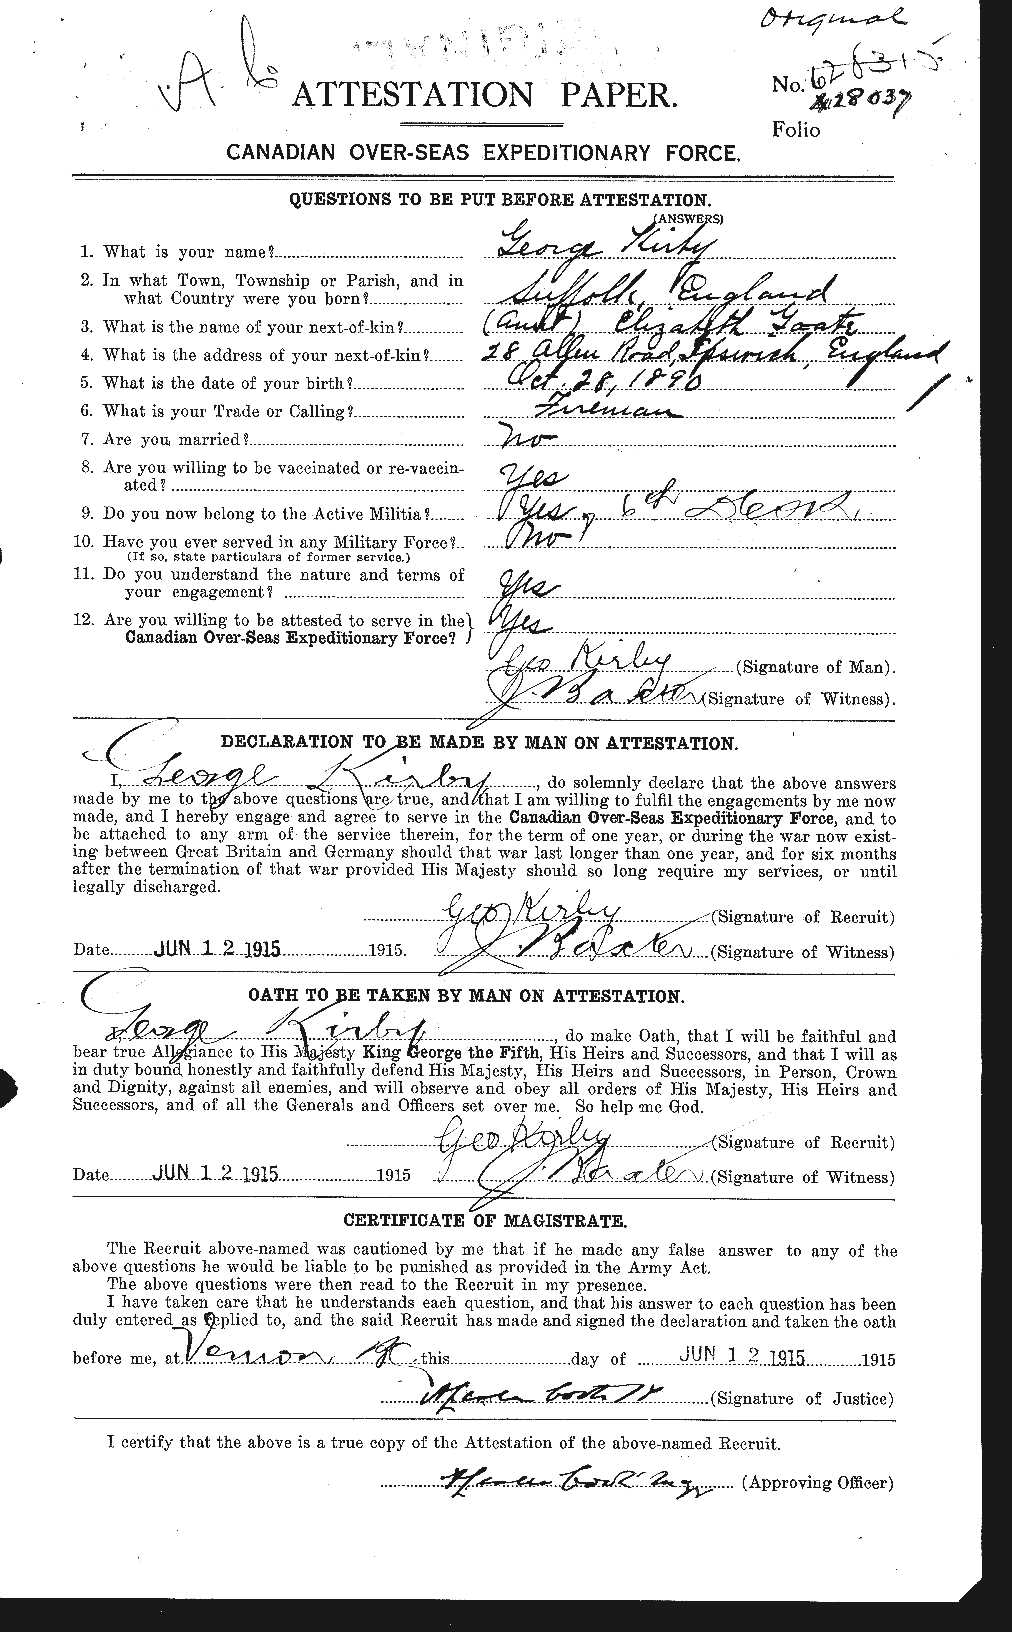 Personnel Records of the First World War - CEF 437195a